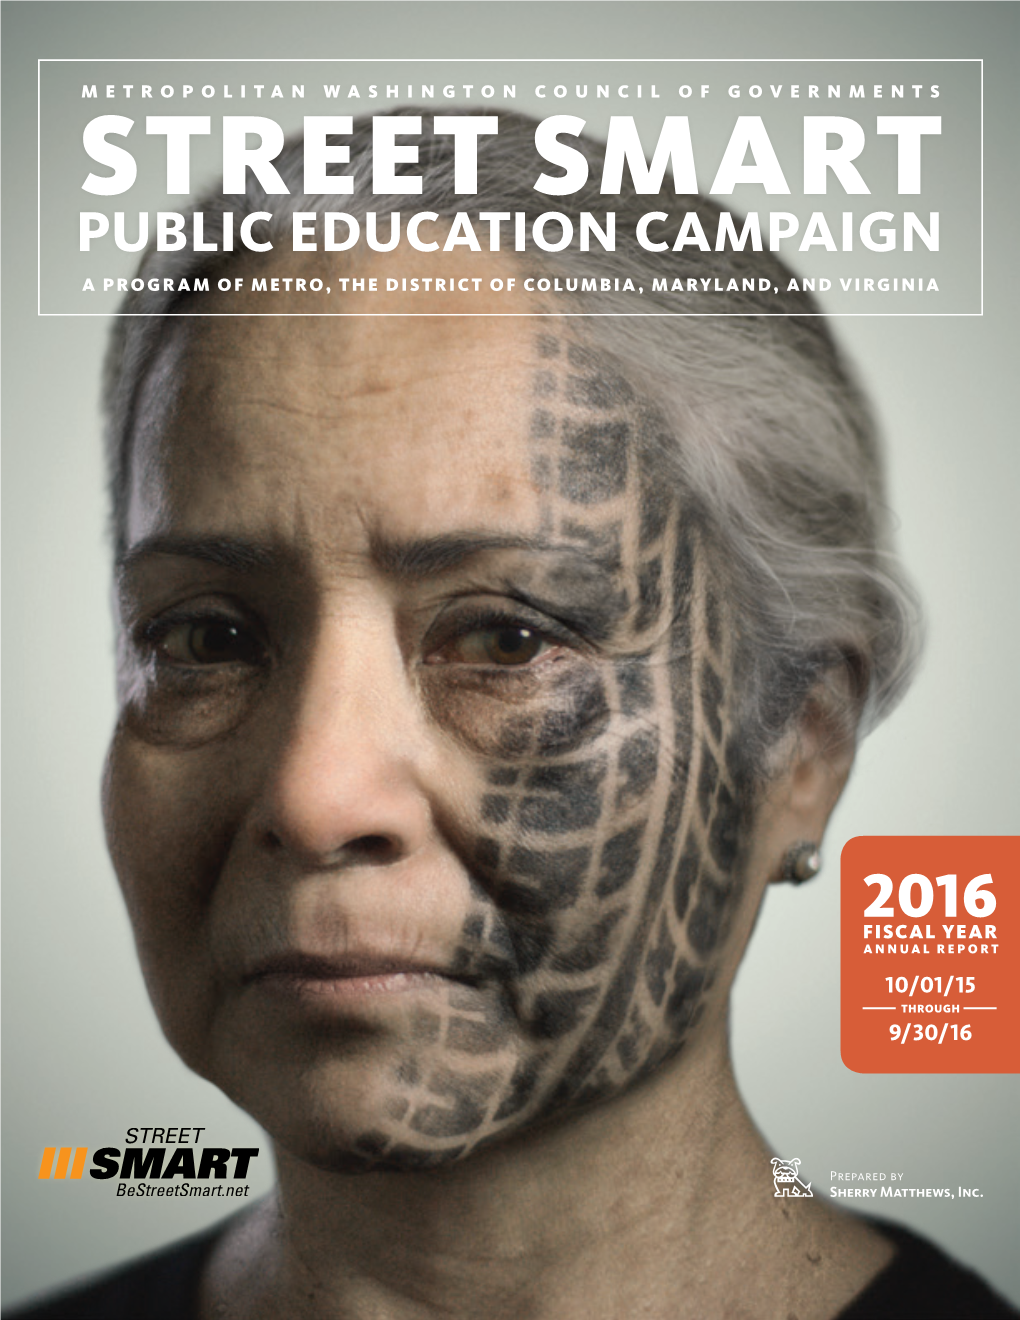 Public Education Campaign a Program of Metro, the District of Columbia, Maryland, and Virginia